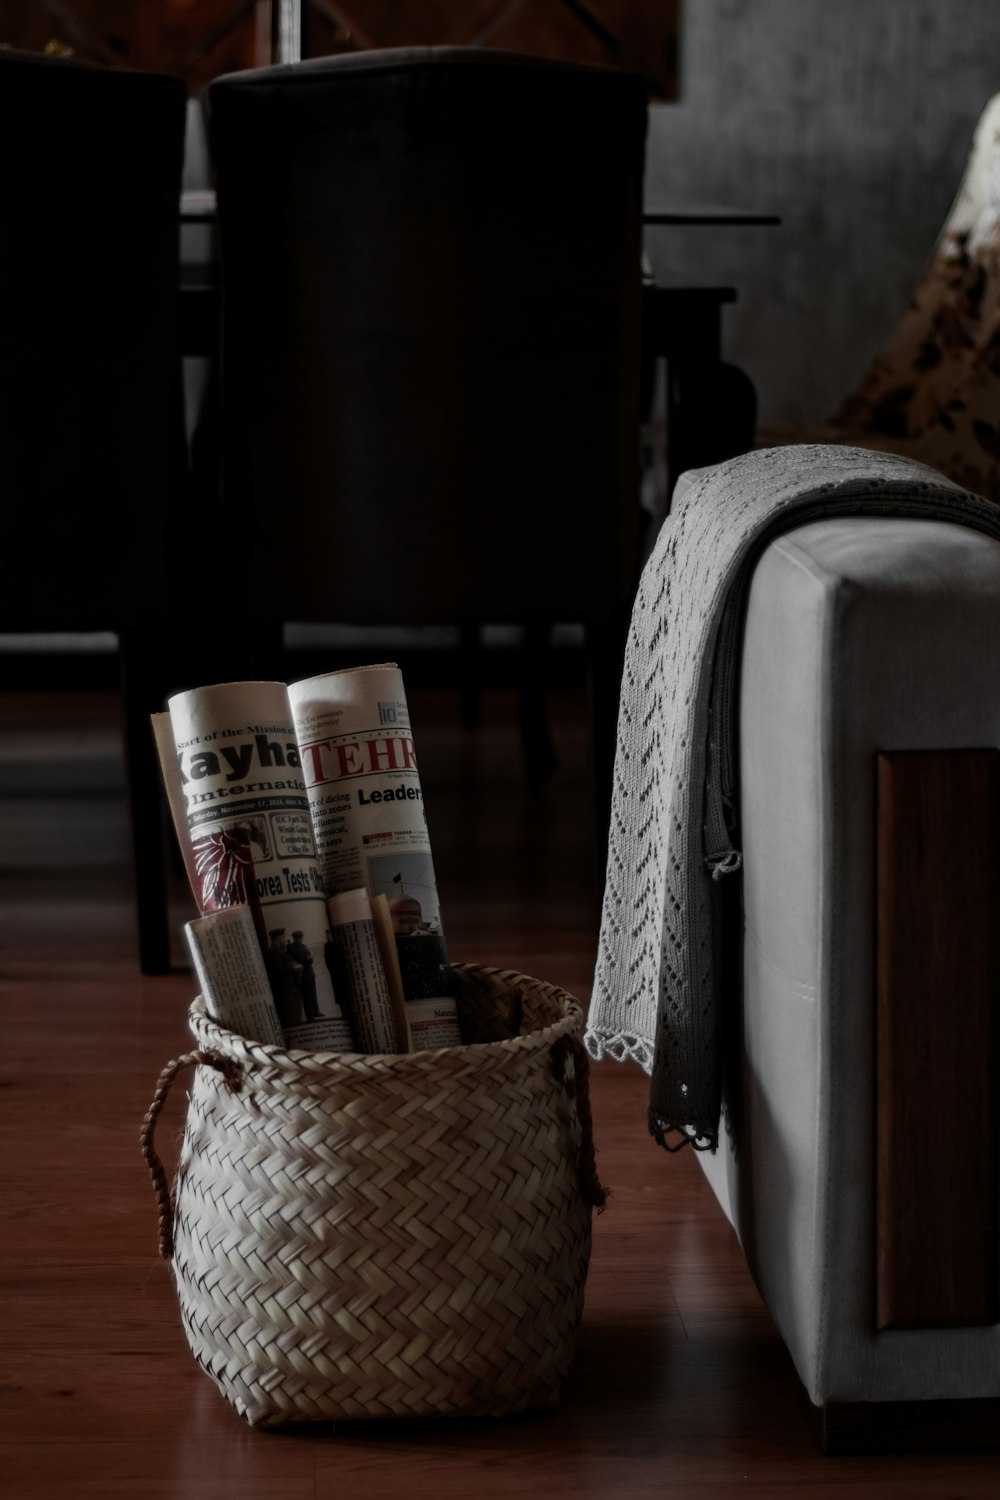 a basket of newspapers sitting on the floor next to a couch